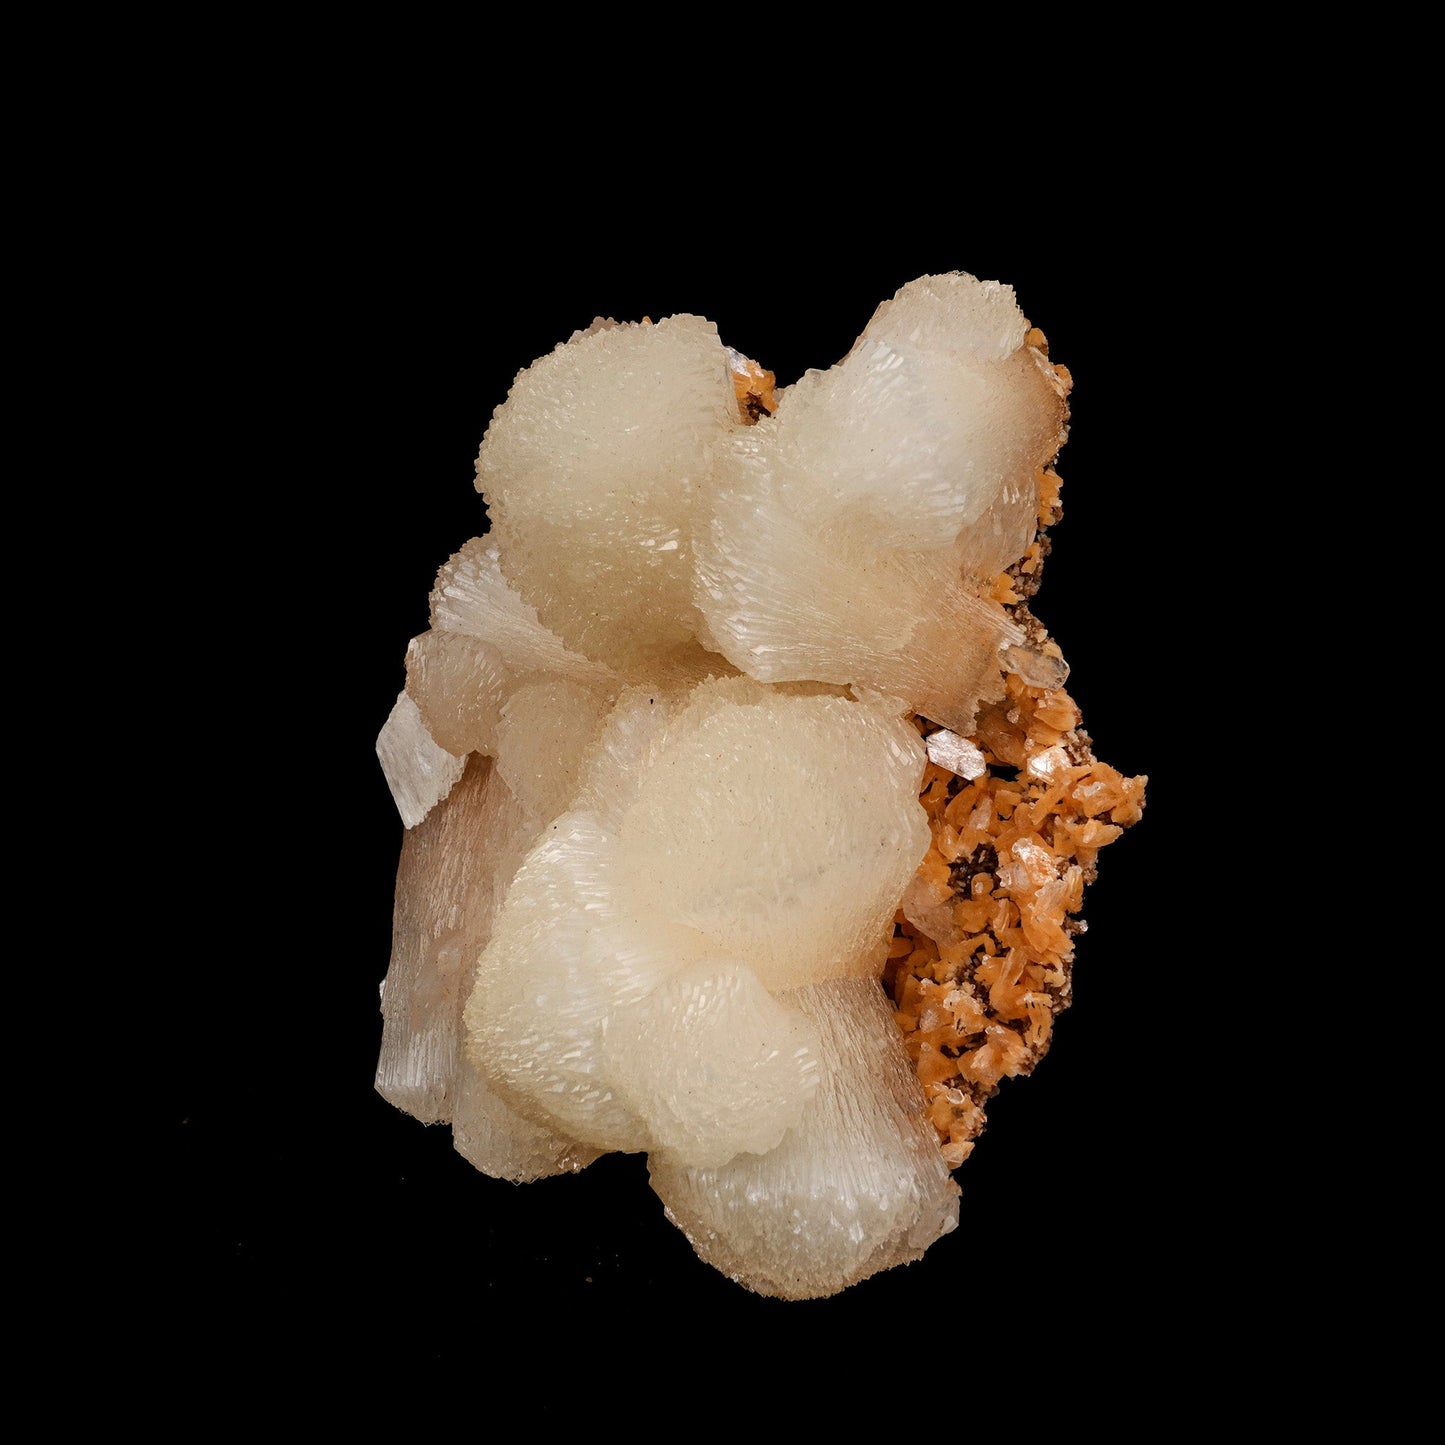 Stilbite Lusterous Cluster Natural Mineral Specimen # B 5251  https://www.superbminerals.us/products/stilbite-lusterous-cluster-natural-mineral-specimen-b-5251  Features: Featuring many excellent quality bladed groups of Stilbite in a soft white hue, resting over pearly stalactitic formations of peach colored Heulandite, this piece is a stunning example of the material. The sculpture is really flashy and three-dimensional, and I particularly like how the Stilbites